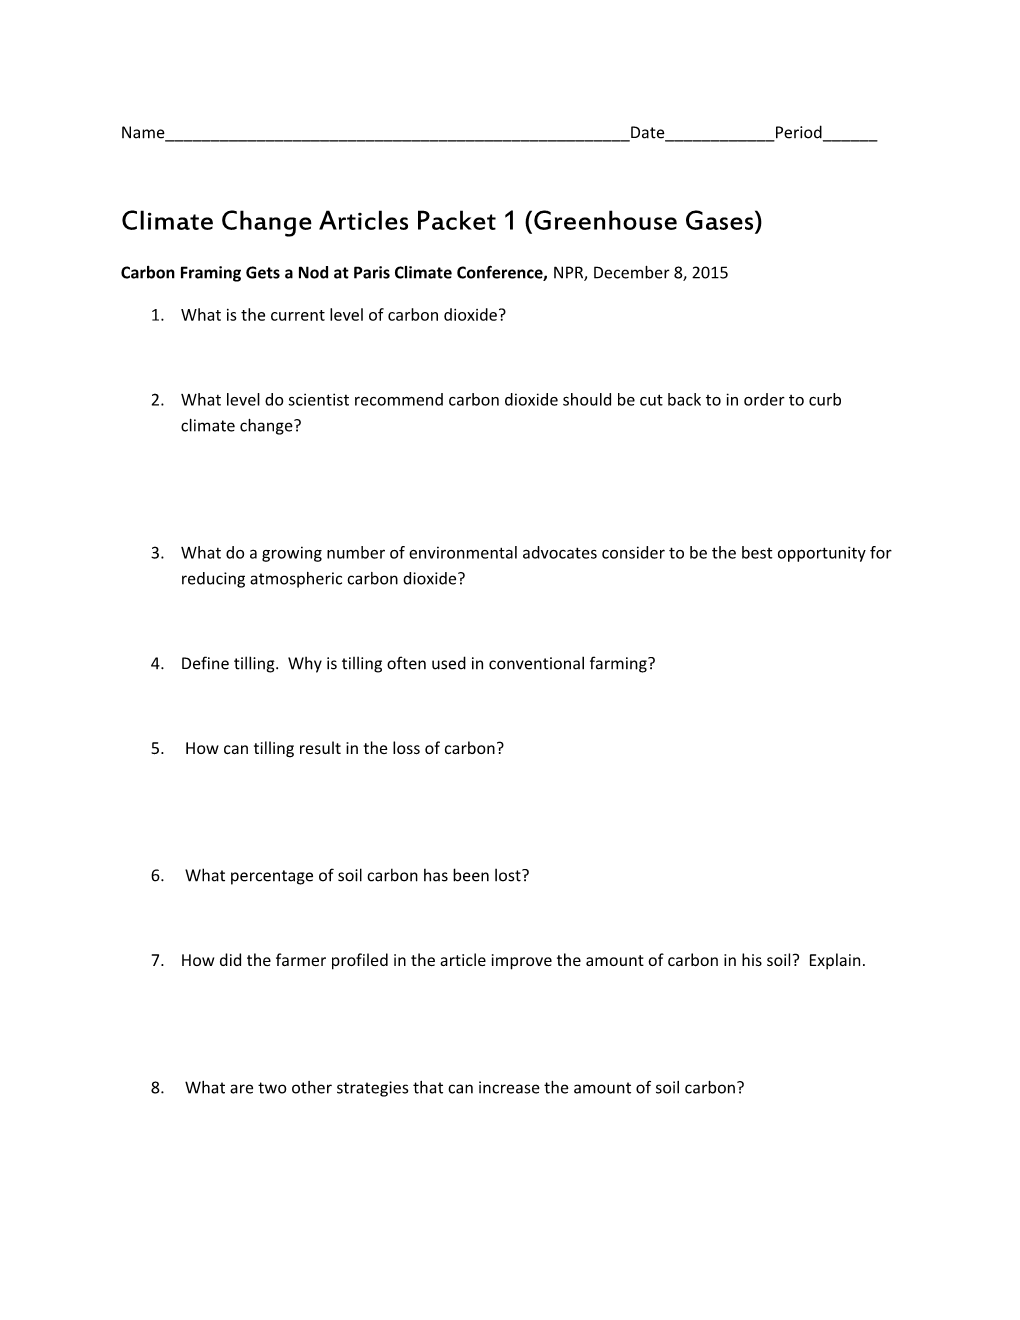 Climate Change Articles Packet 1 (Greenhouse Gases)